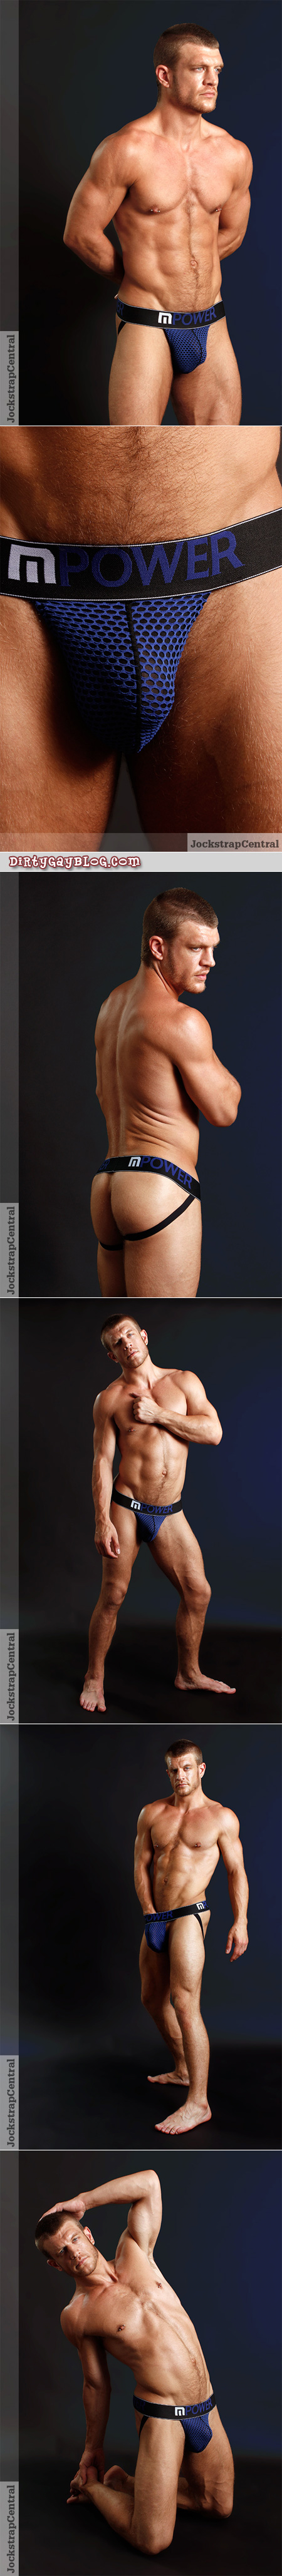 Blonde haired blue eyed hairy muscle hunk posing in a jockstrap.